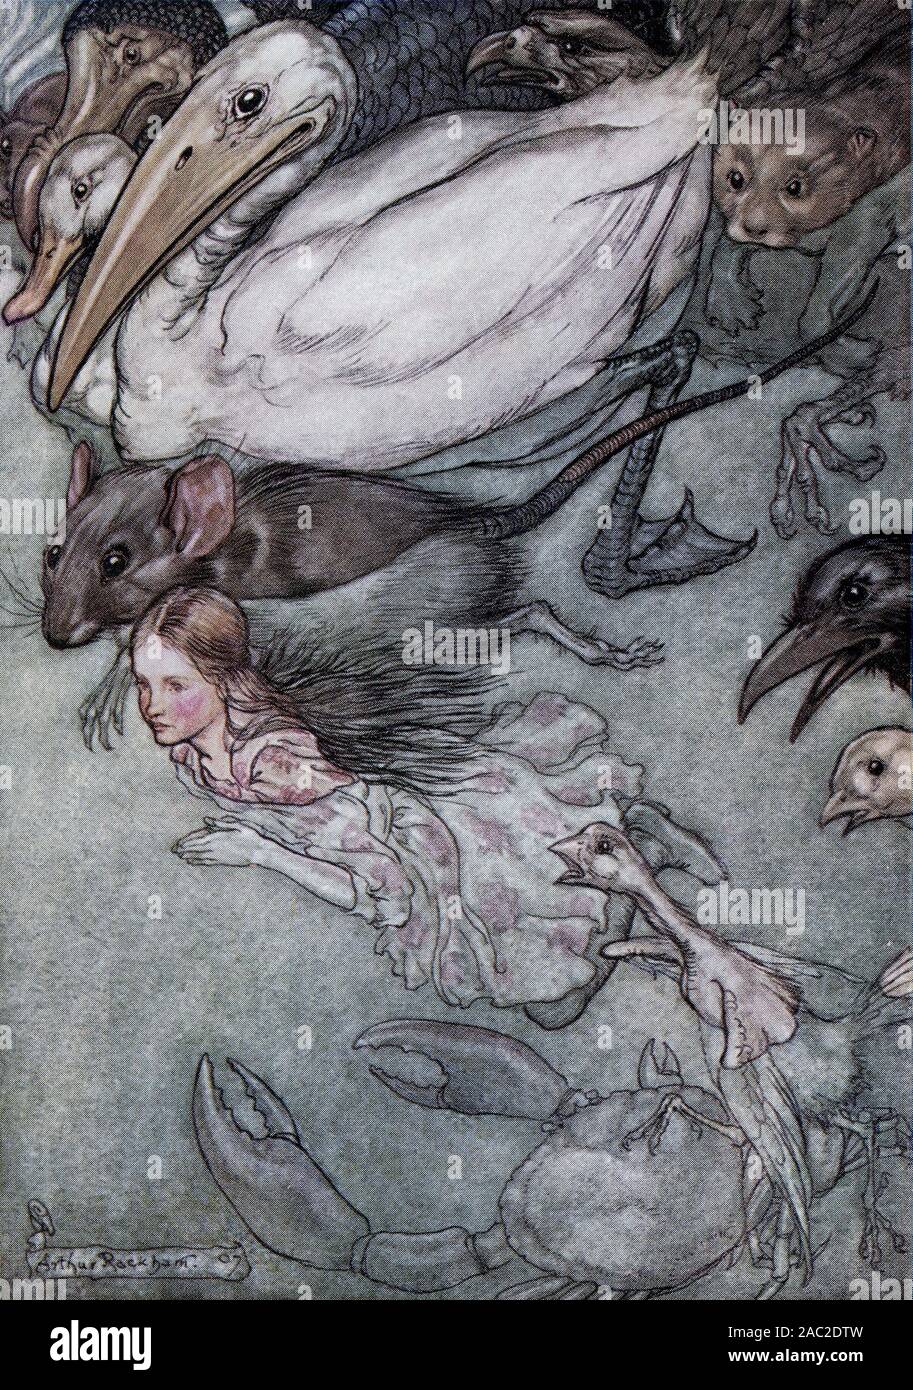 Arthur Rackham's illustration for the 1907 edition of Lewis Carroll's ALICE IN WONDERLAND - 'The Pool of Tears' Stock Photo